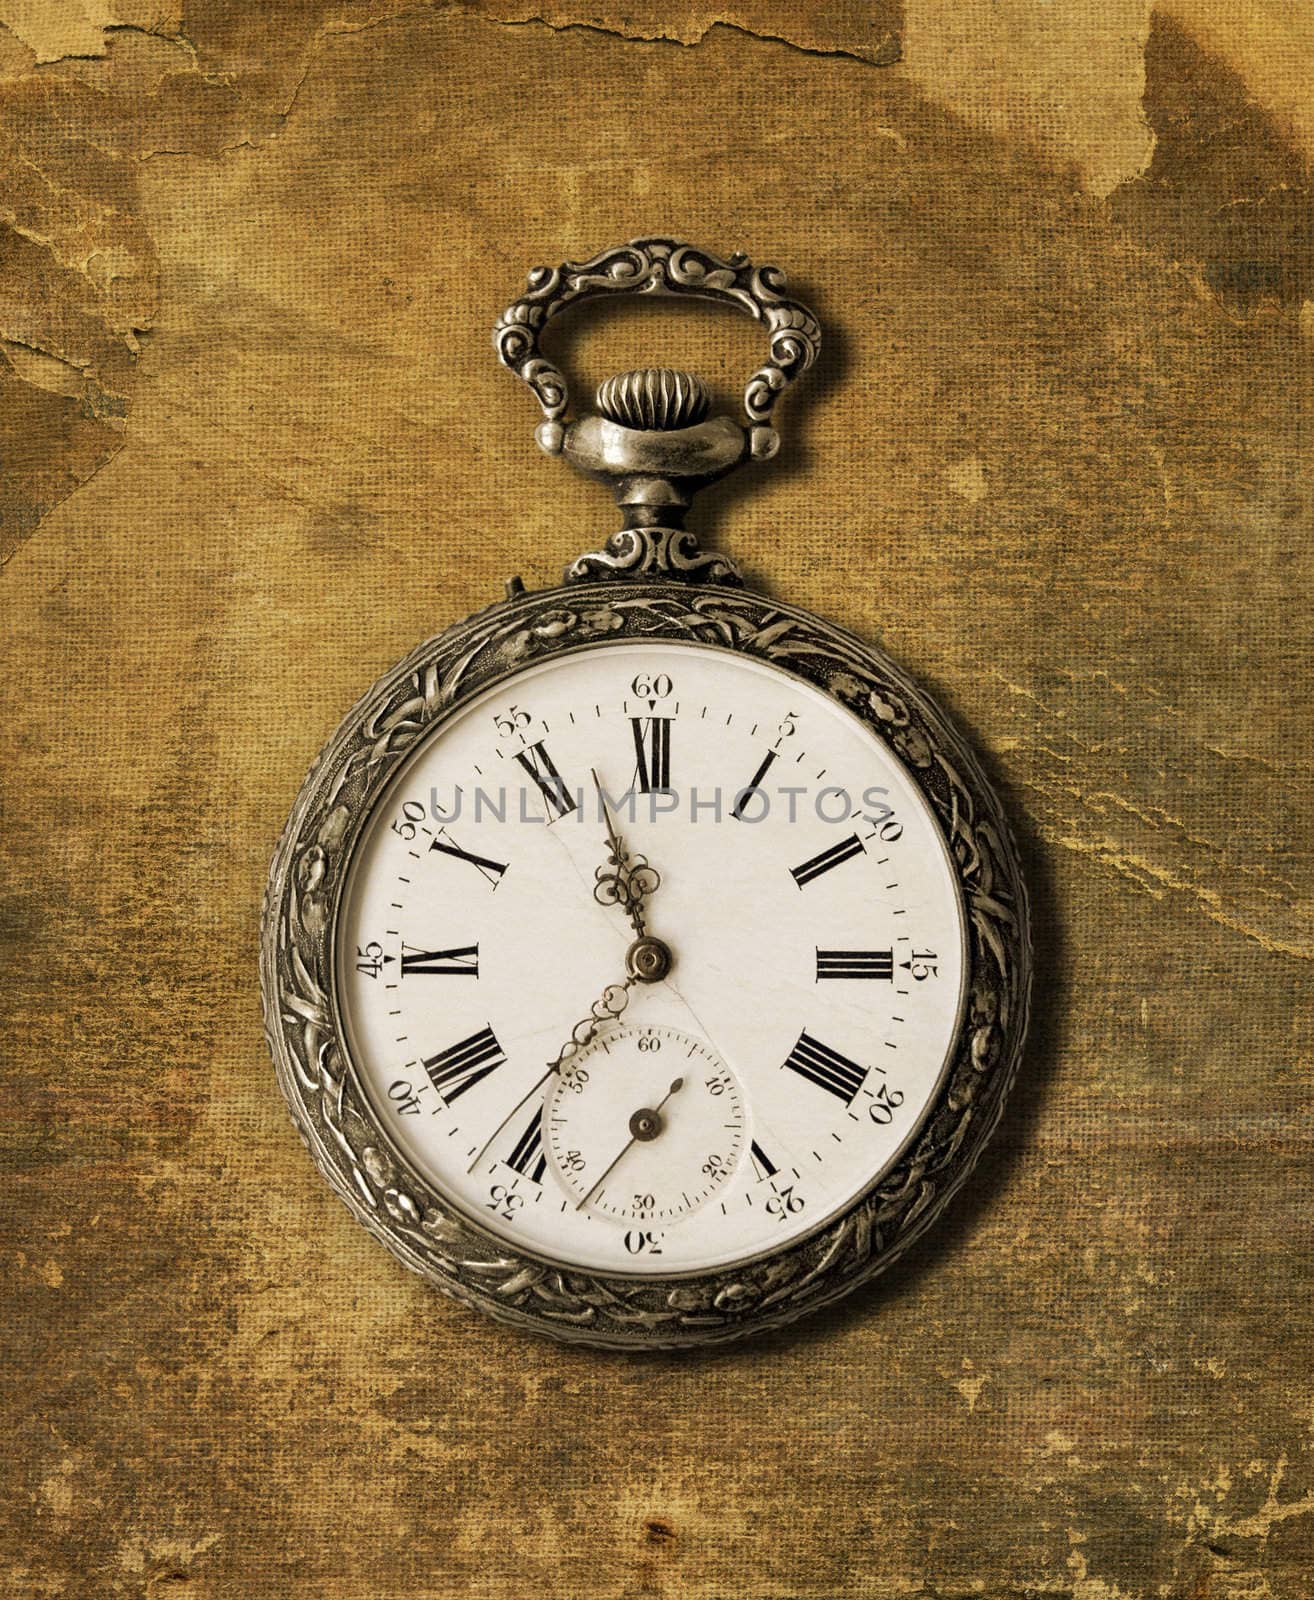 Old Pocket watch from the 1900s on a textured background